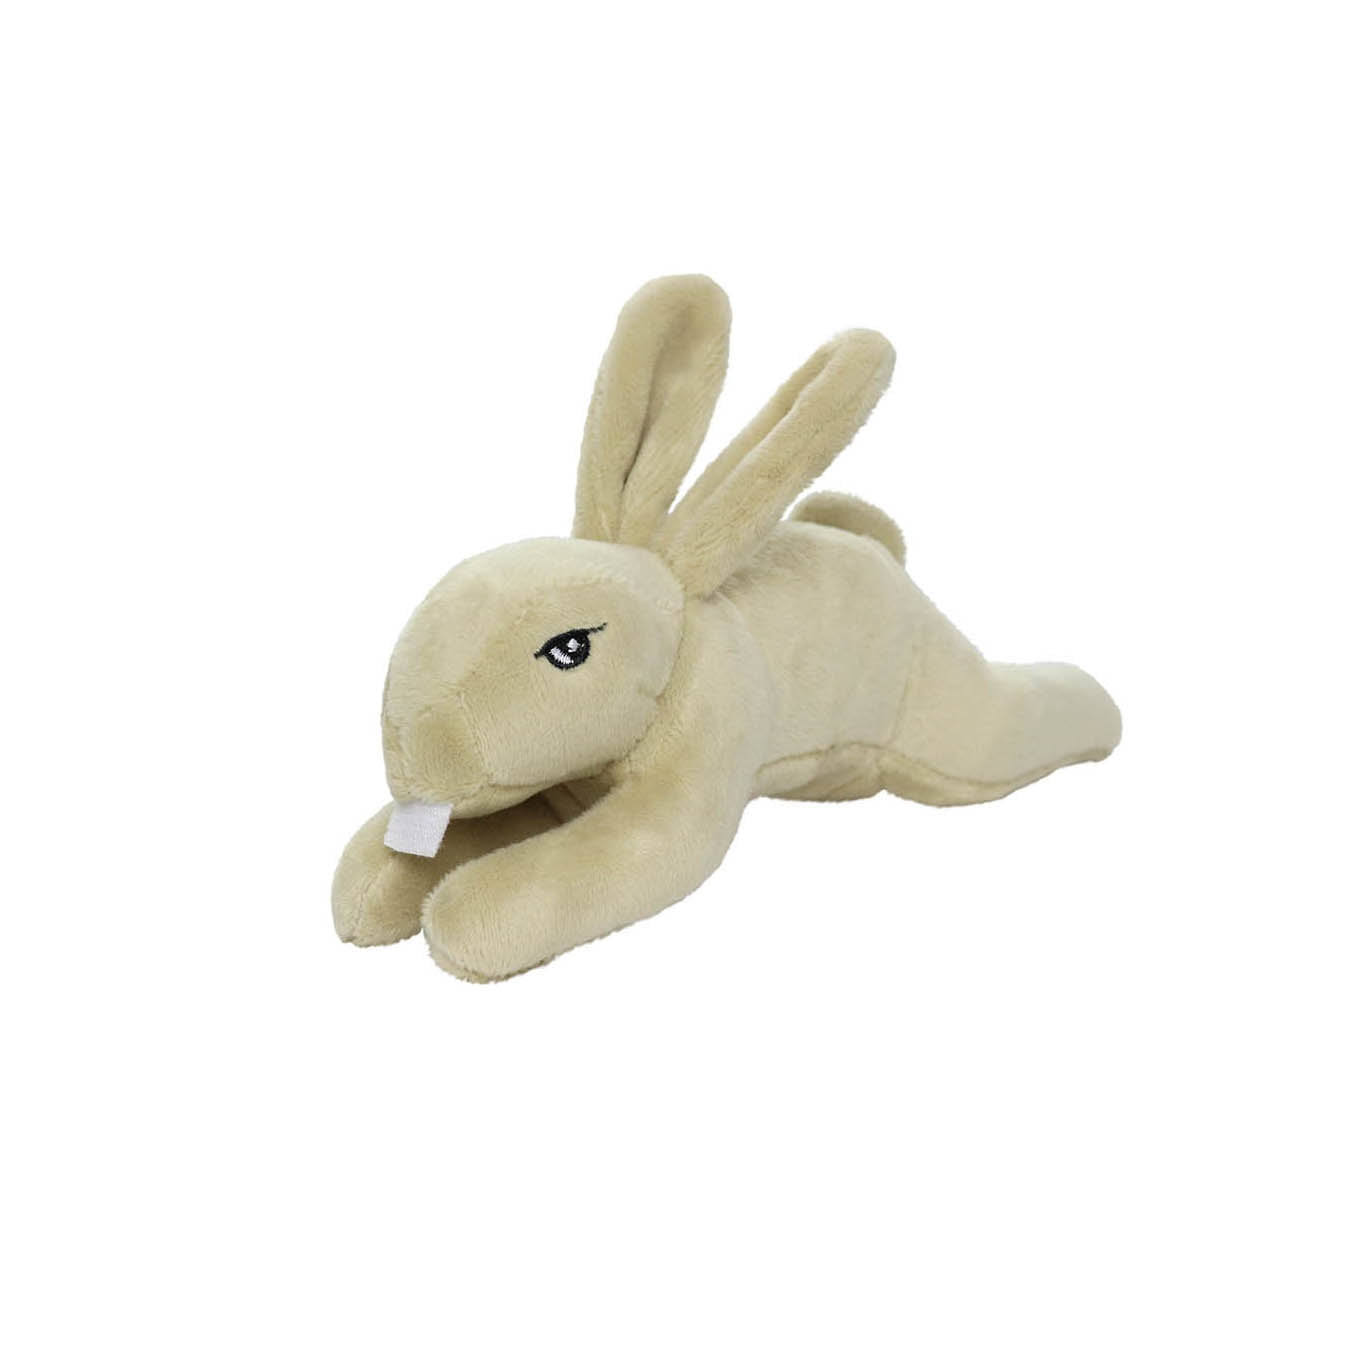 Mighty Rabbit Dog Toy - Brown